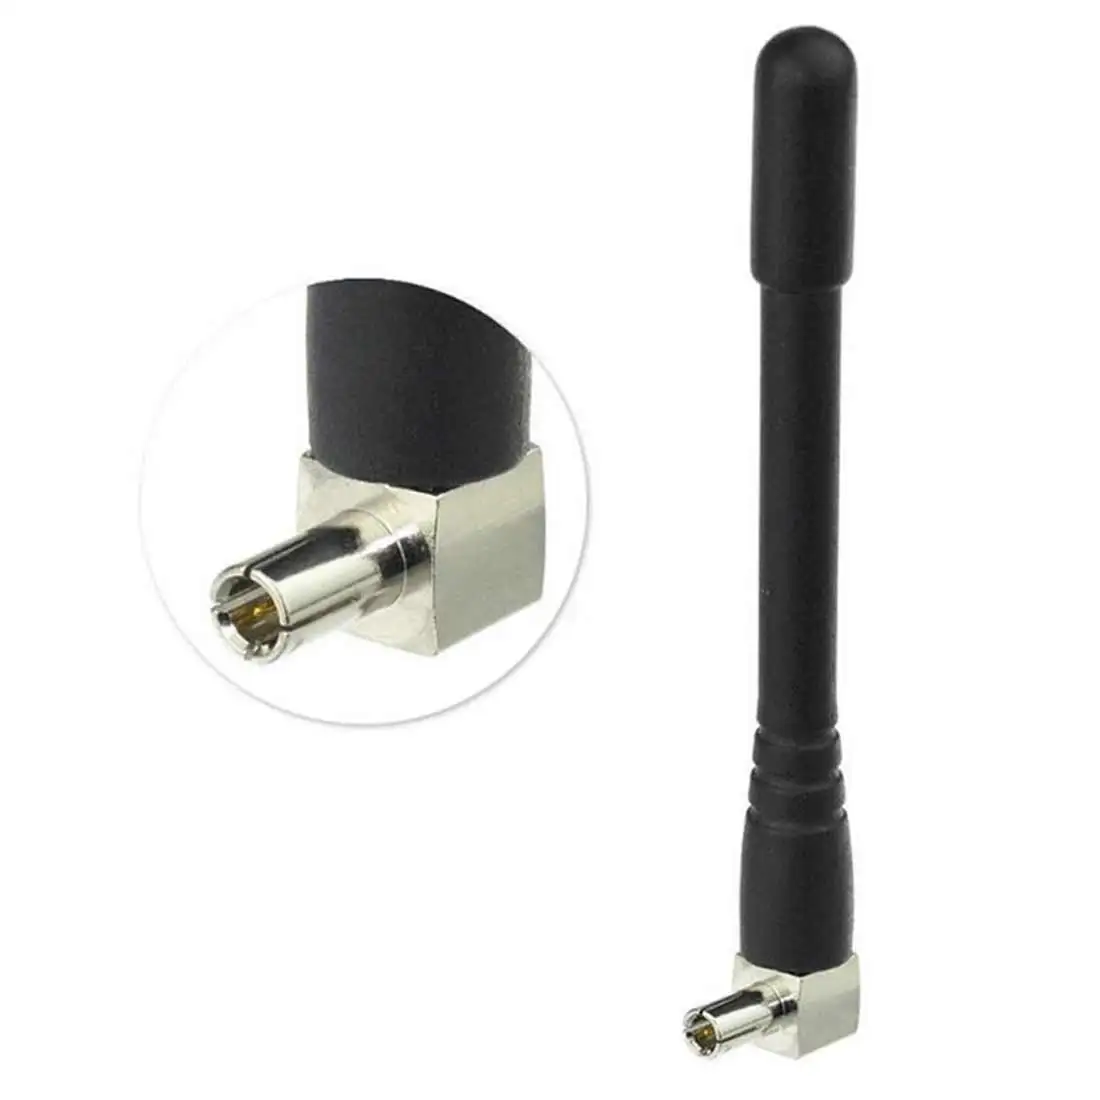 2pcs/lot WiFi 3G 4G antenna TS9 Wireless Router Antenna for Huawei E5573 E8372 for PCI Card USB Wireless Router